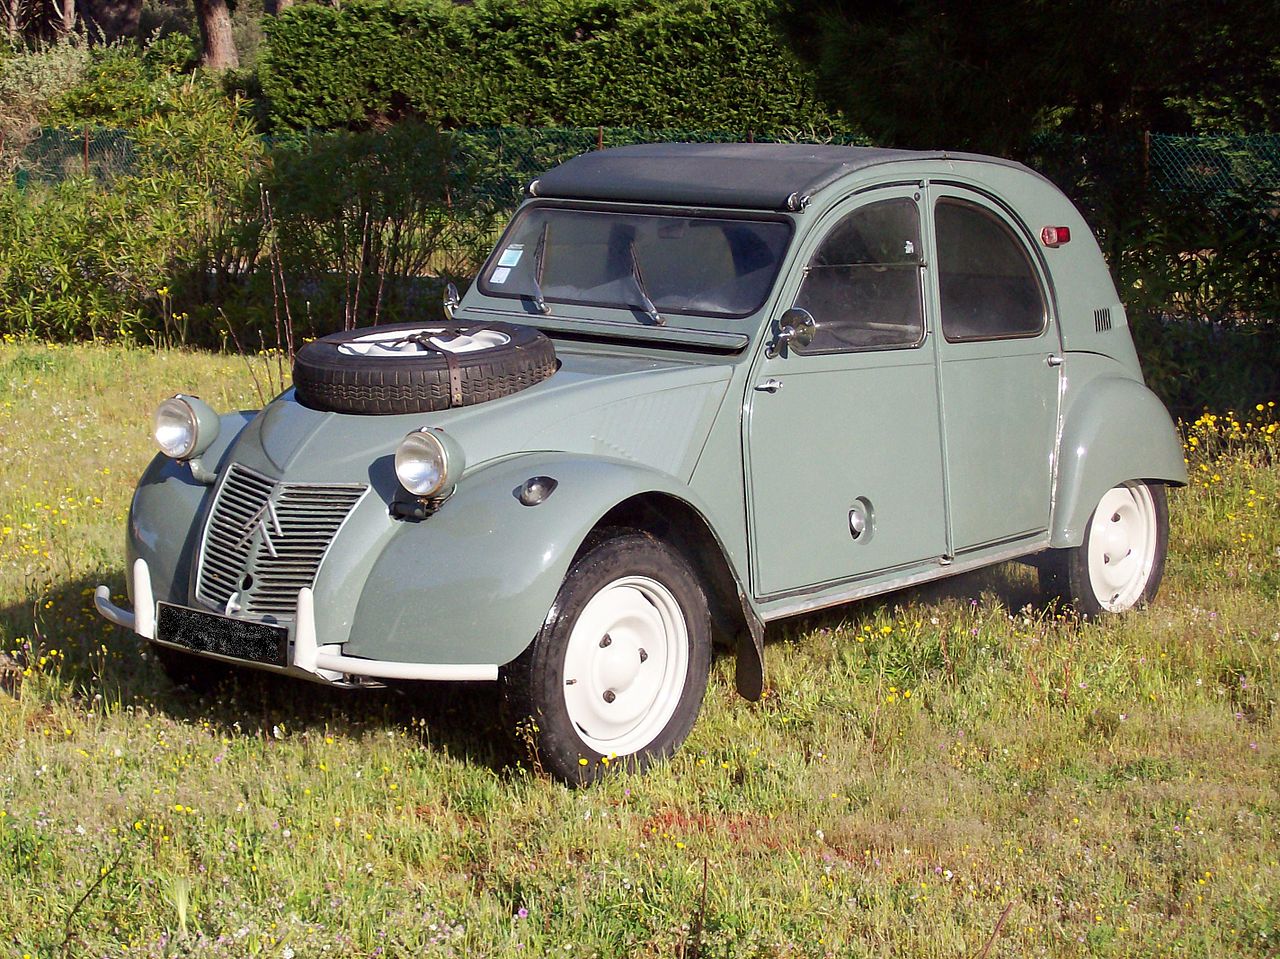 Citroën 2CV Sahara has a spare tyre mounted on the bonnet/hood Land Rover style. (Picture courtesy Wikipedia).